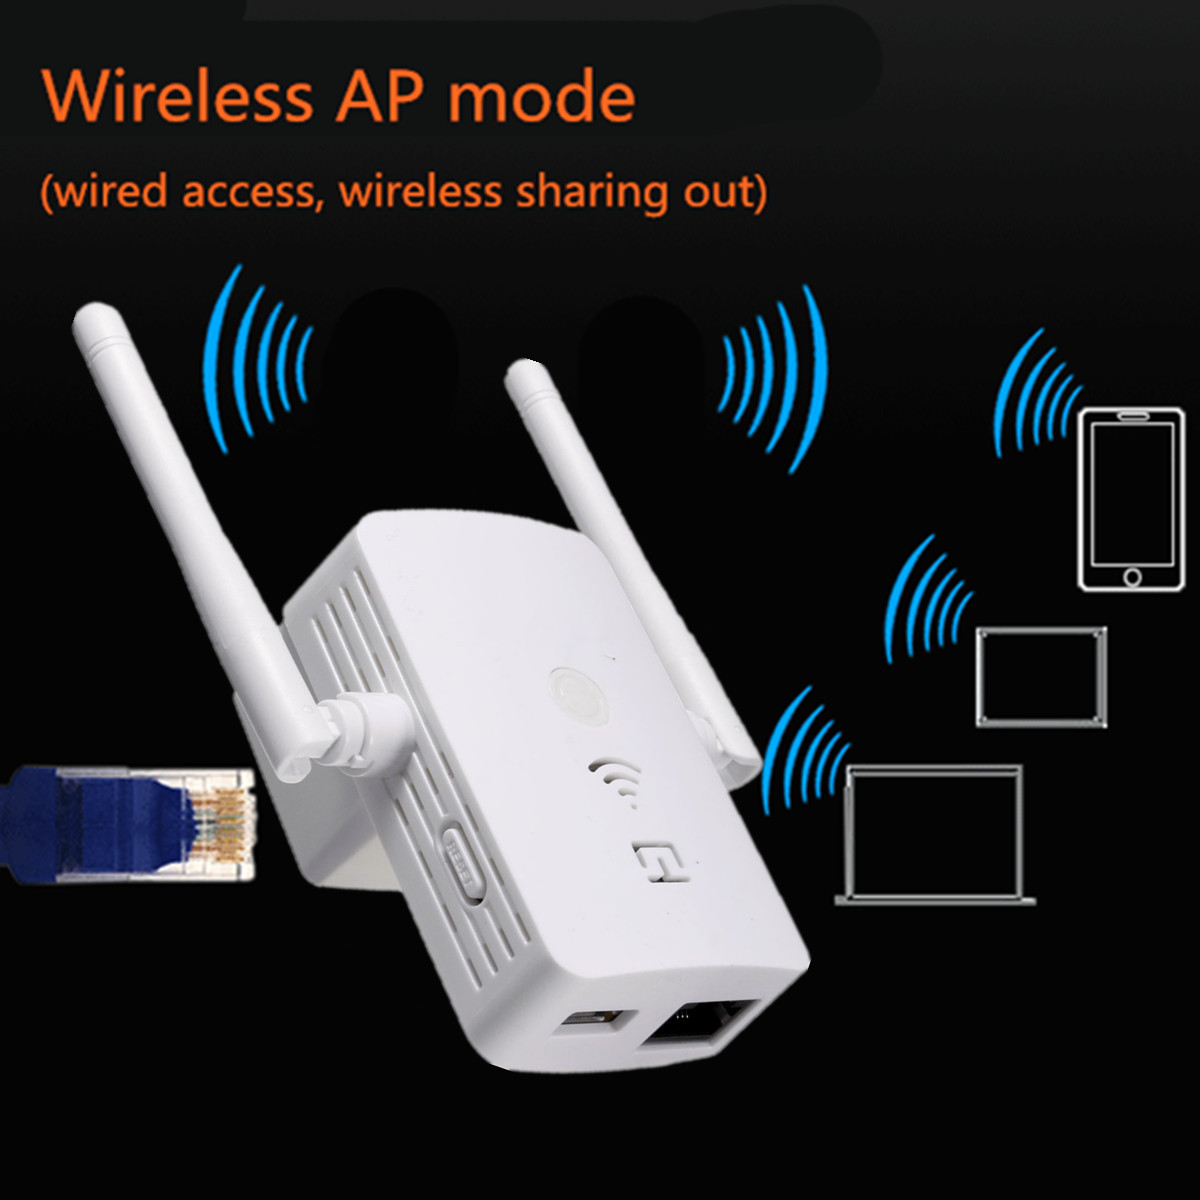 150Mbps-Wireless-WiFi-Range-Extender-Signal-Booster-Router-Repeater-Dual-Antenna-with-LAN-USB-Port-1119784-6